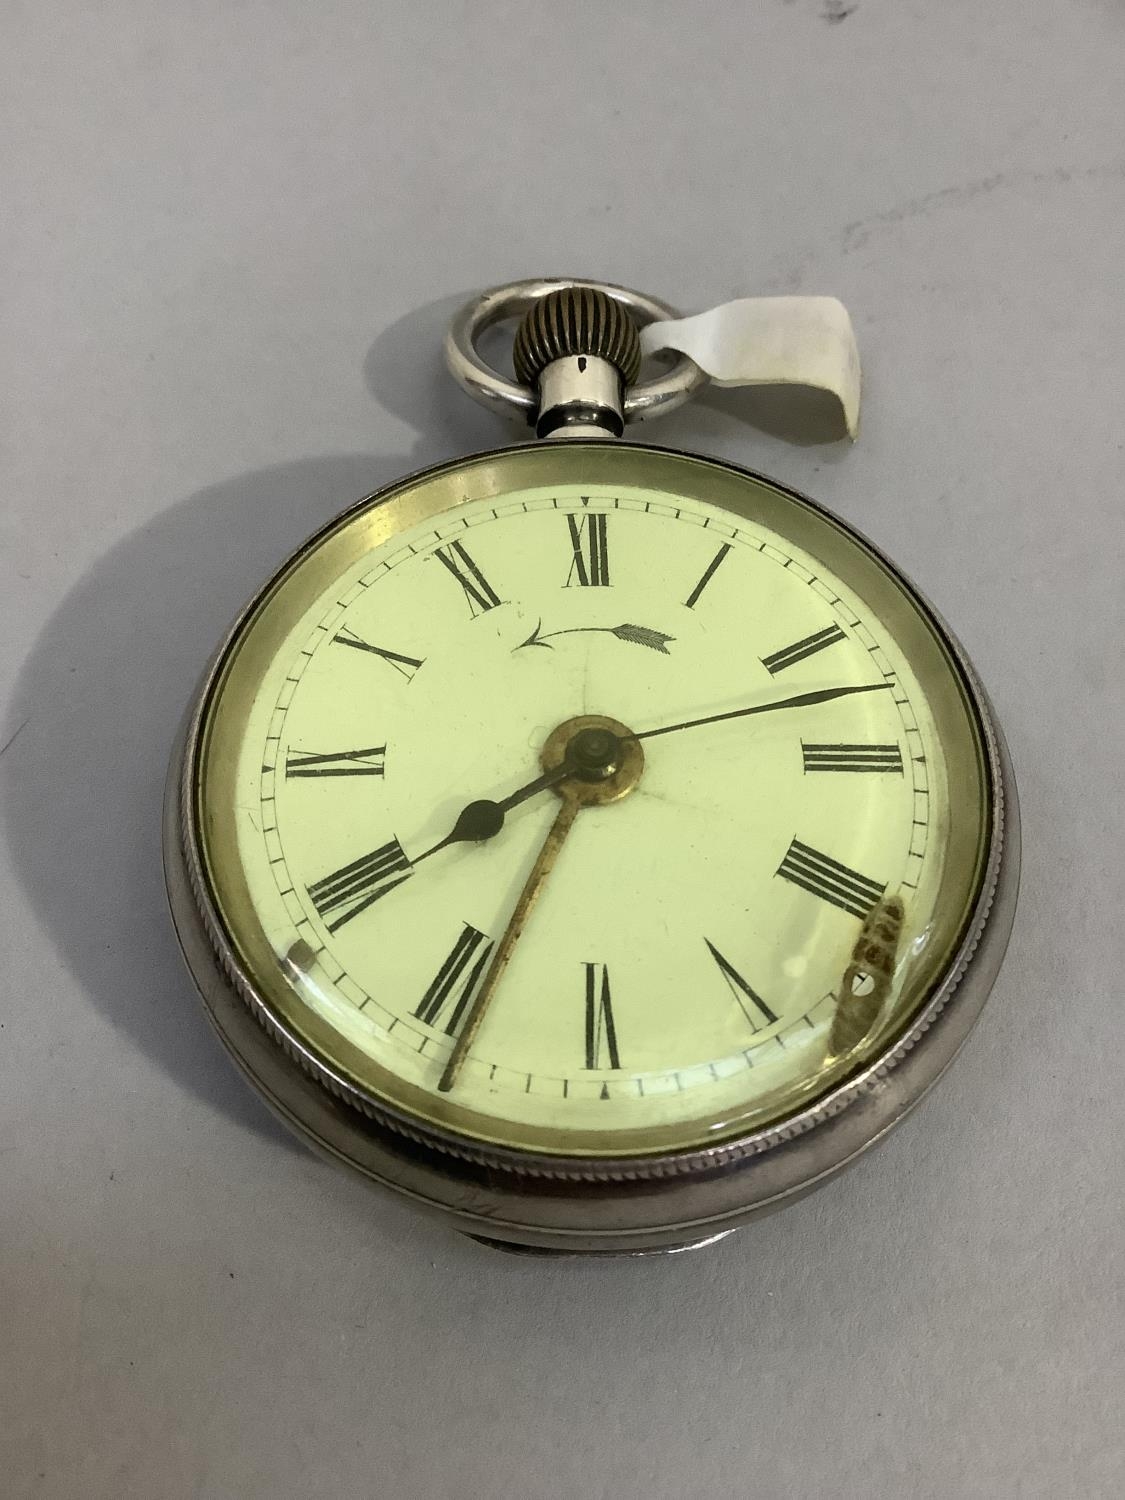 A late 19th century pocket watch alarm in open faced silver case with Swiss hallmarks, approximate